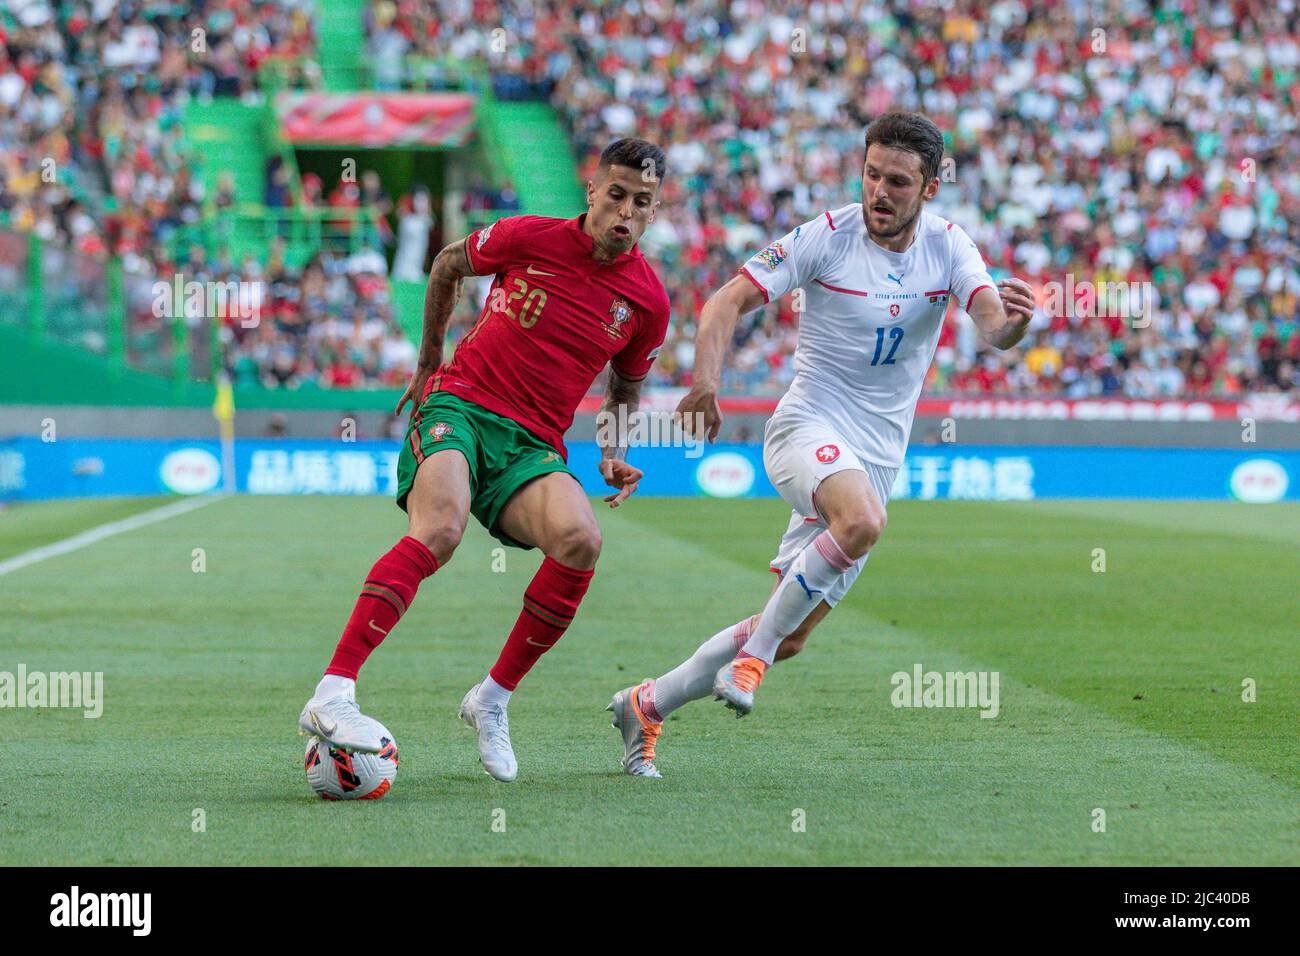 June 09, 2022. Lisbon, Portugal. Portugal's and Manchester City defender Joao Cancelo (20) and Czechia's and Plzen defender Milan Havel (12) in action during the UEFA Nations League Final Tournament between Portugal and Czechia Credit: Alexandre de Sousa/Alamy Live News Stock Photo